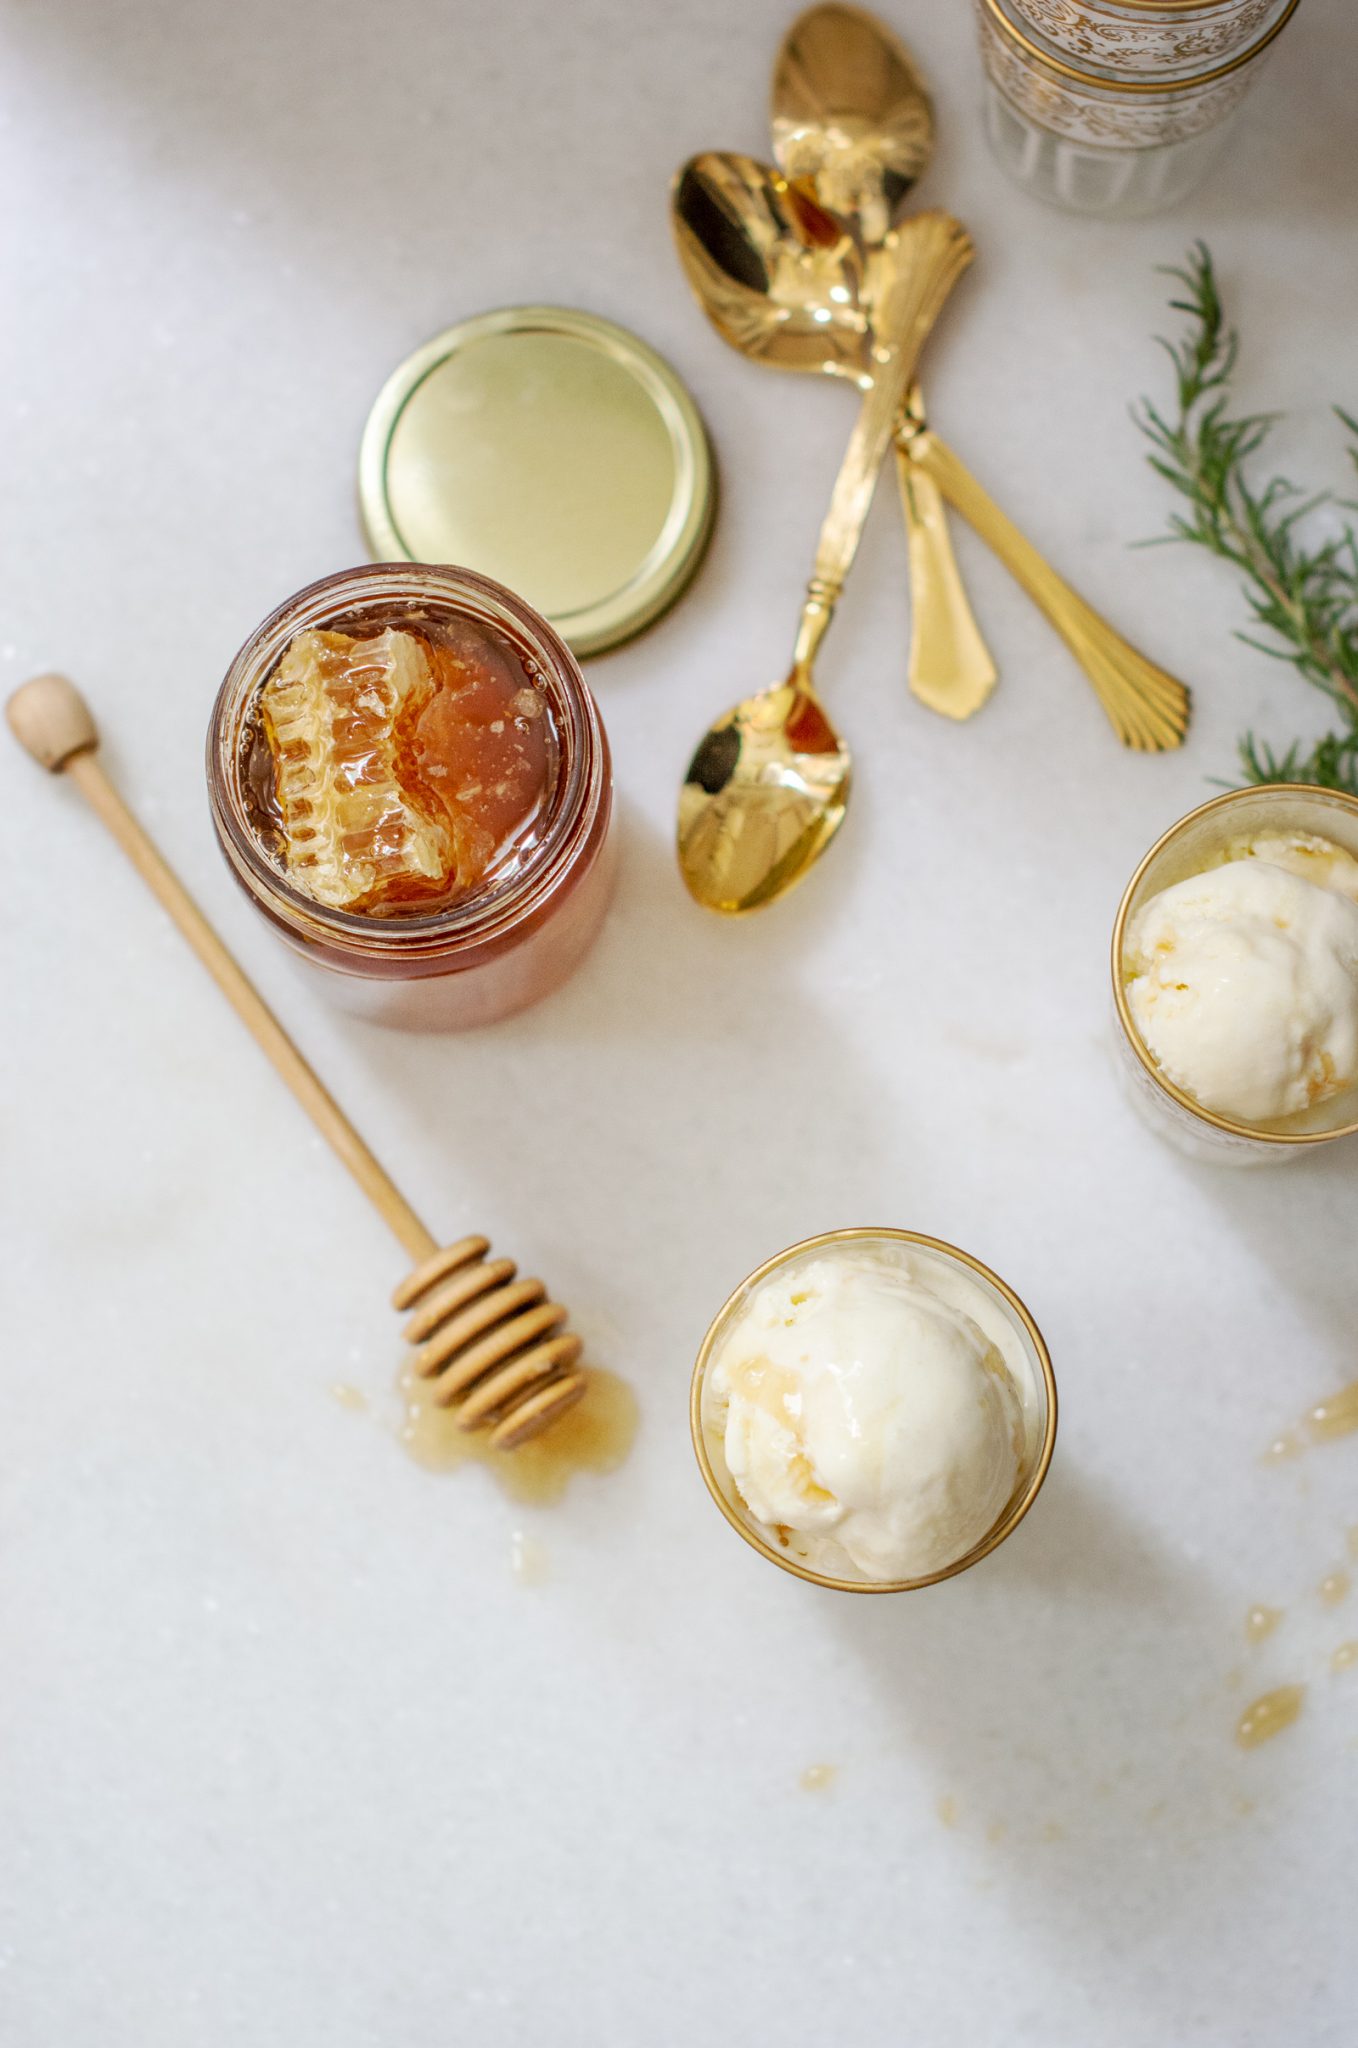 Rosemary and Honey Ice Cream on white marble tabletop with opened jar of honey - Benefits of Honey in recipes